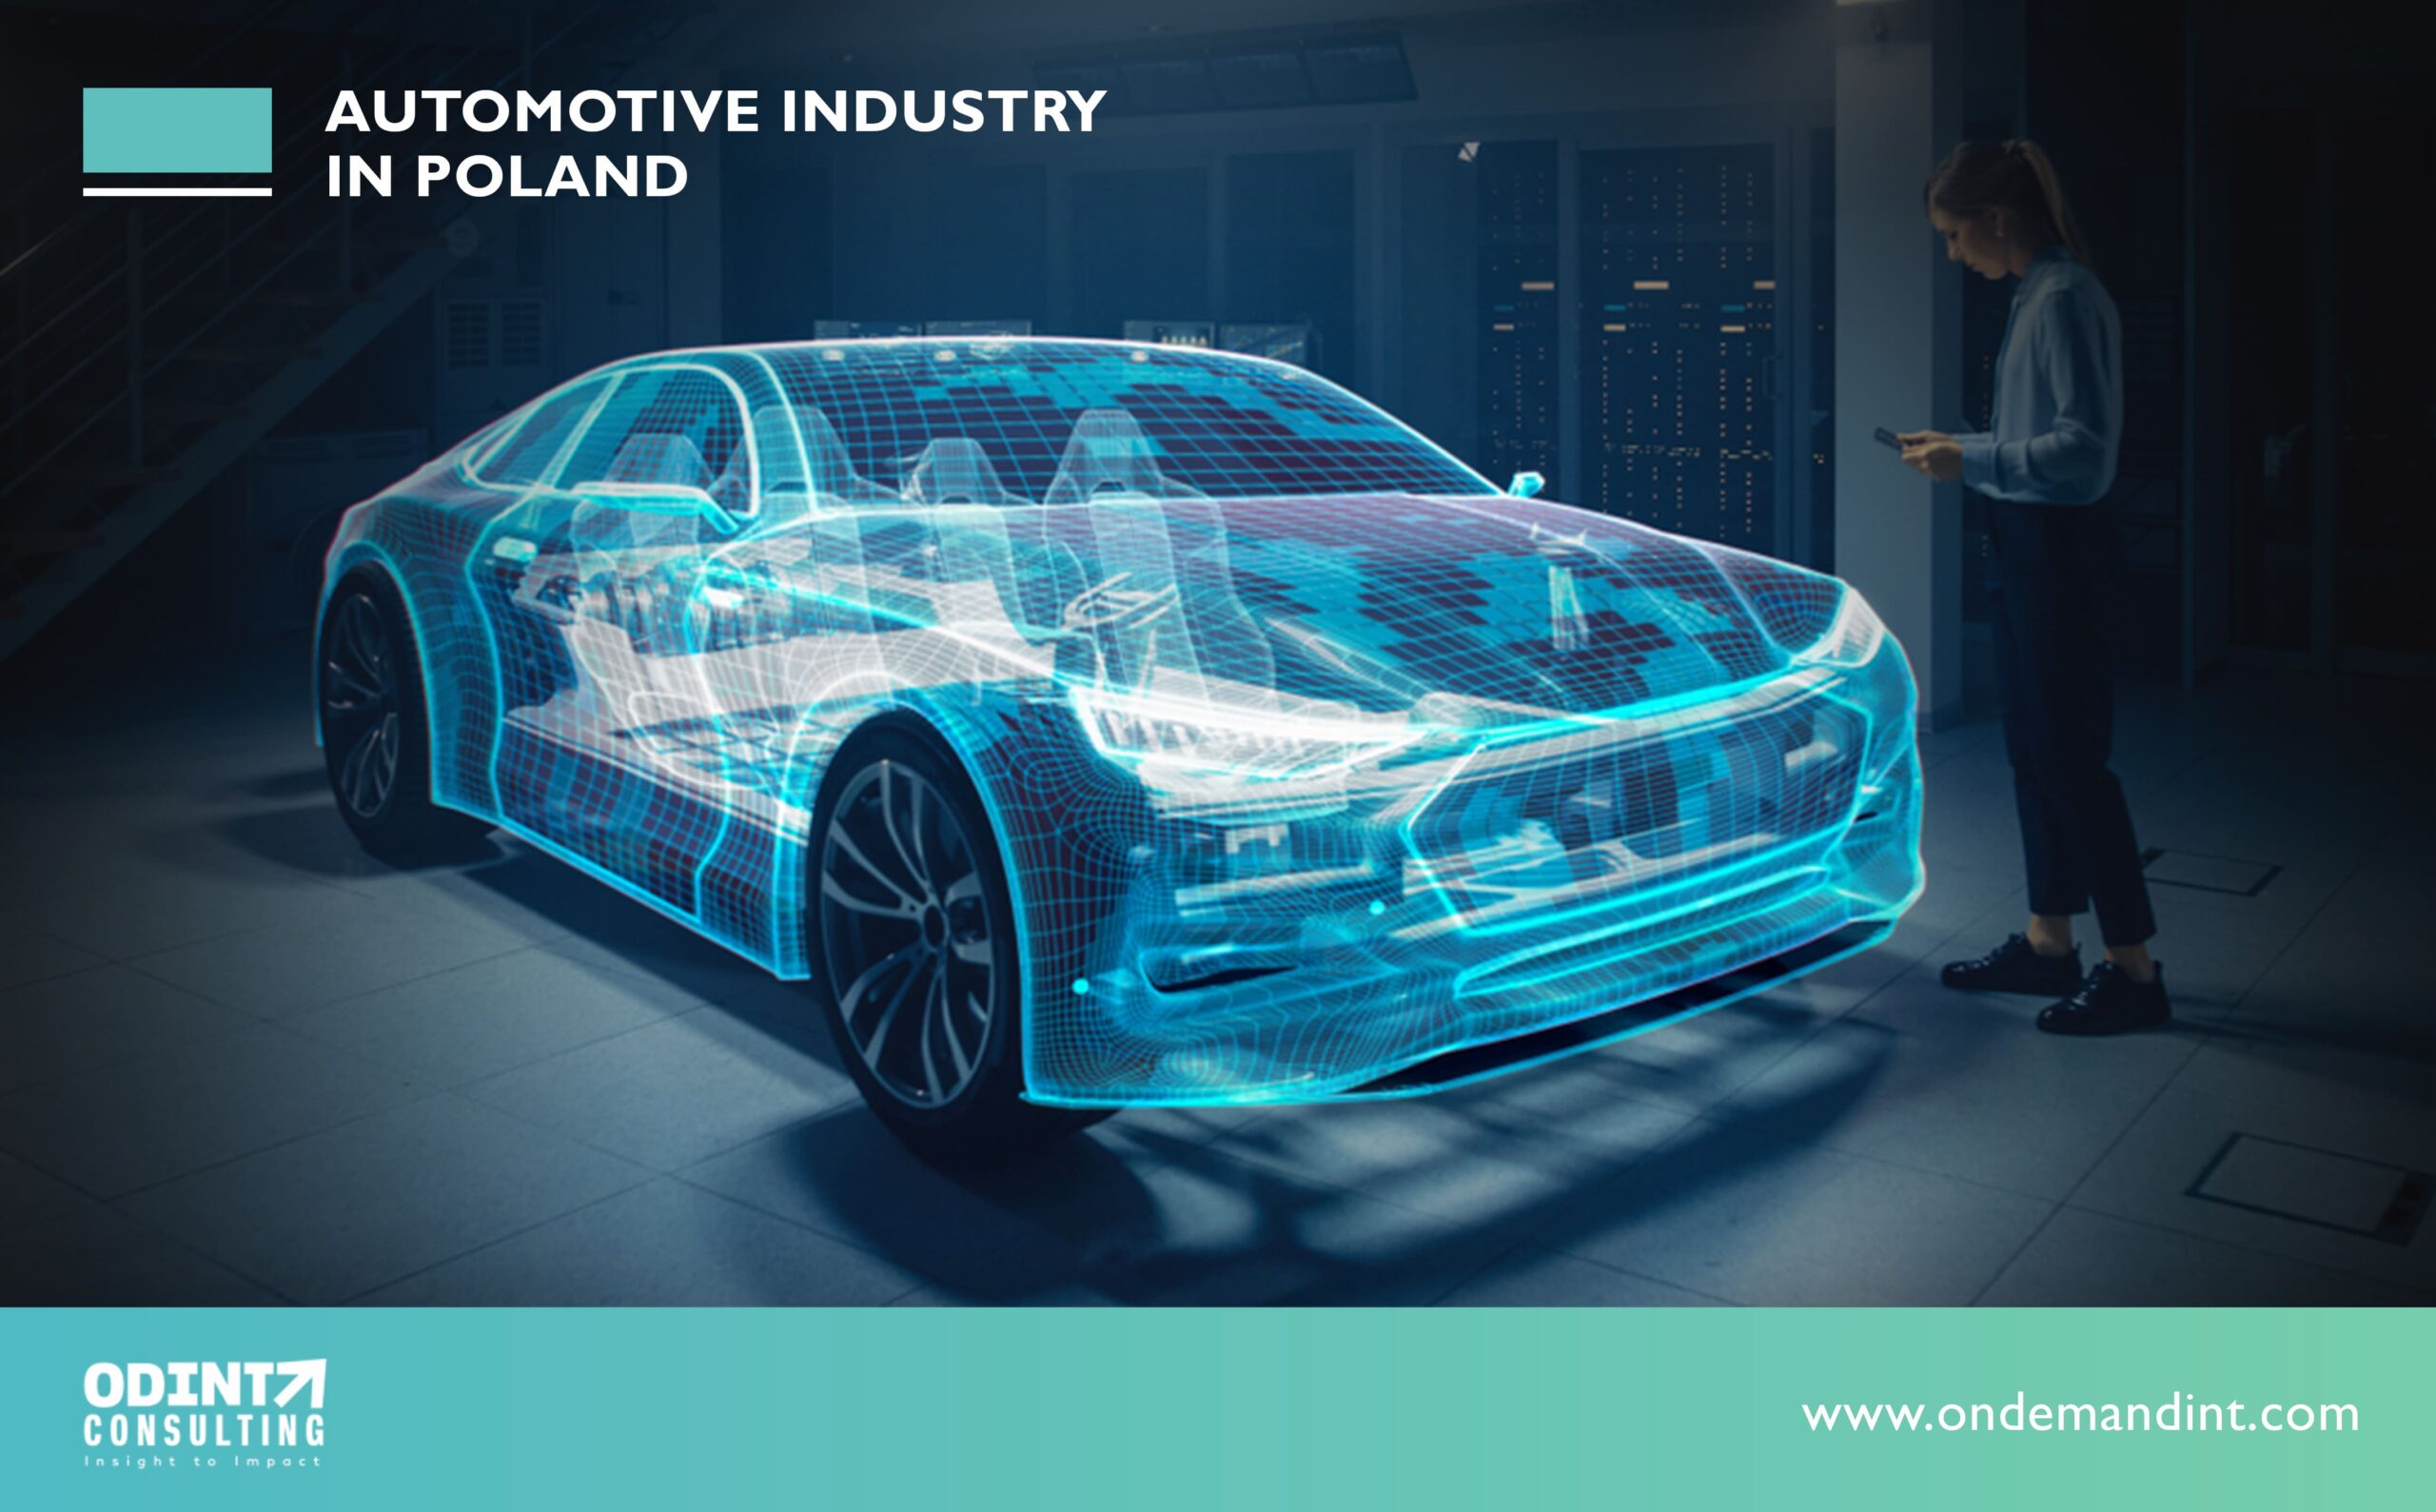 Automotive Industry in Poland: Features, Growth, Exports & Investment Support